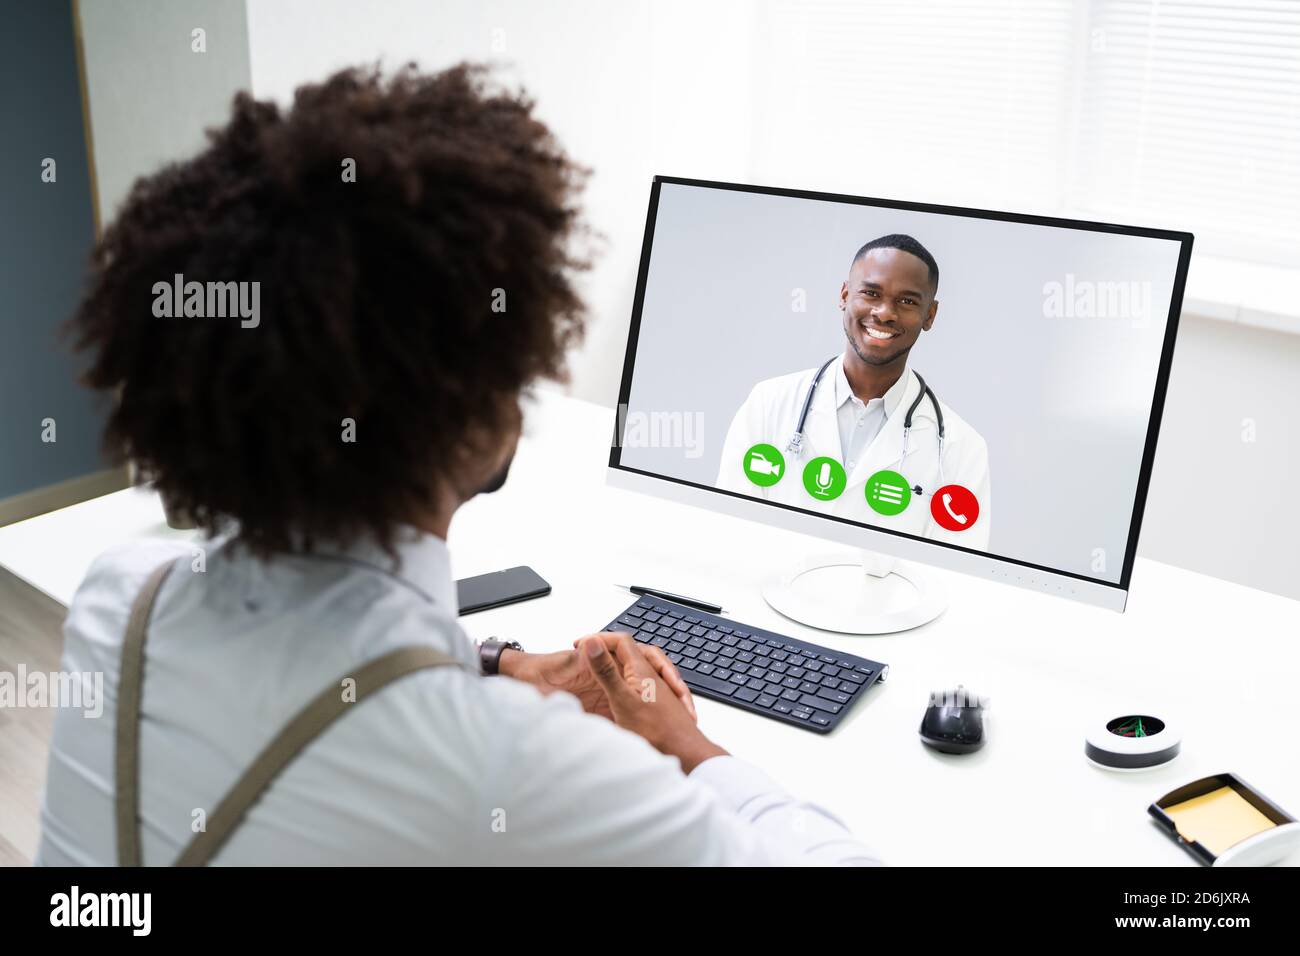 Physician Doctor Web Video Chat. Online Conference Stock Photo